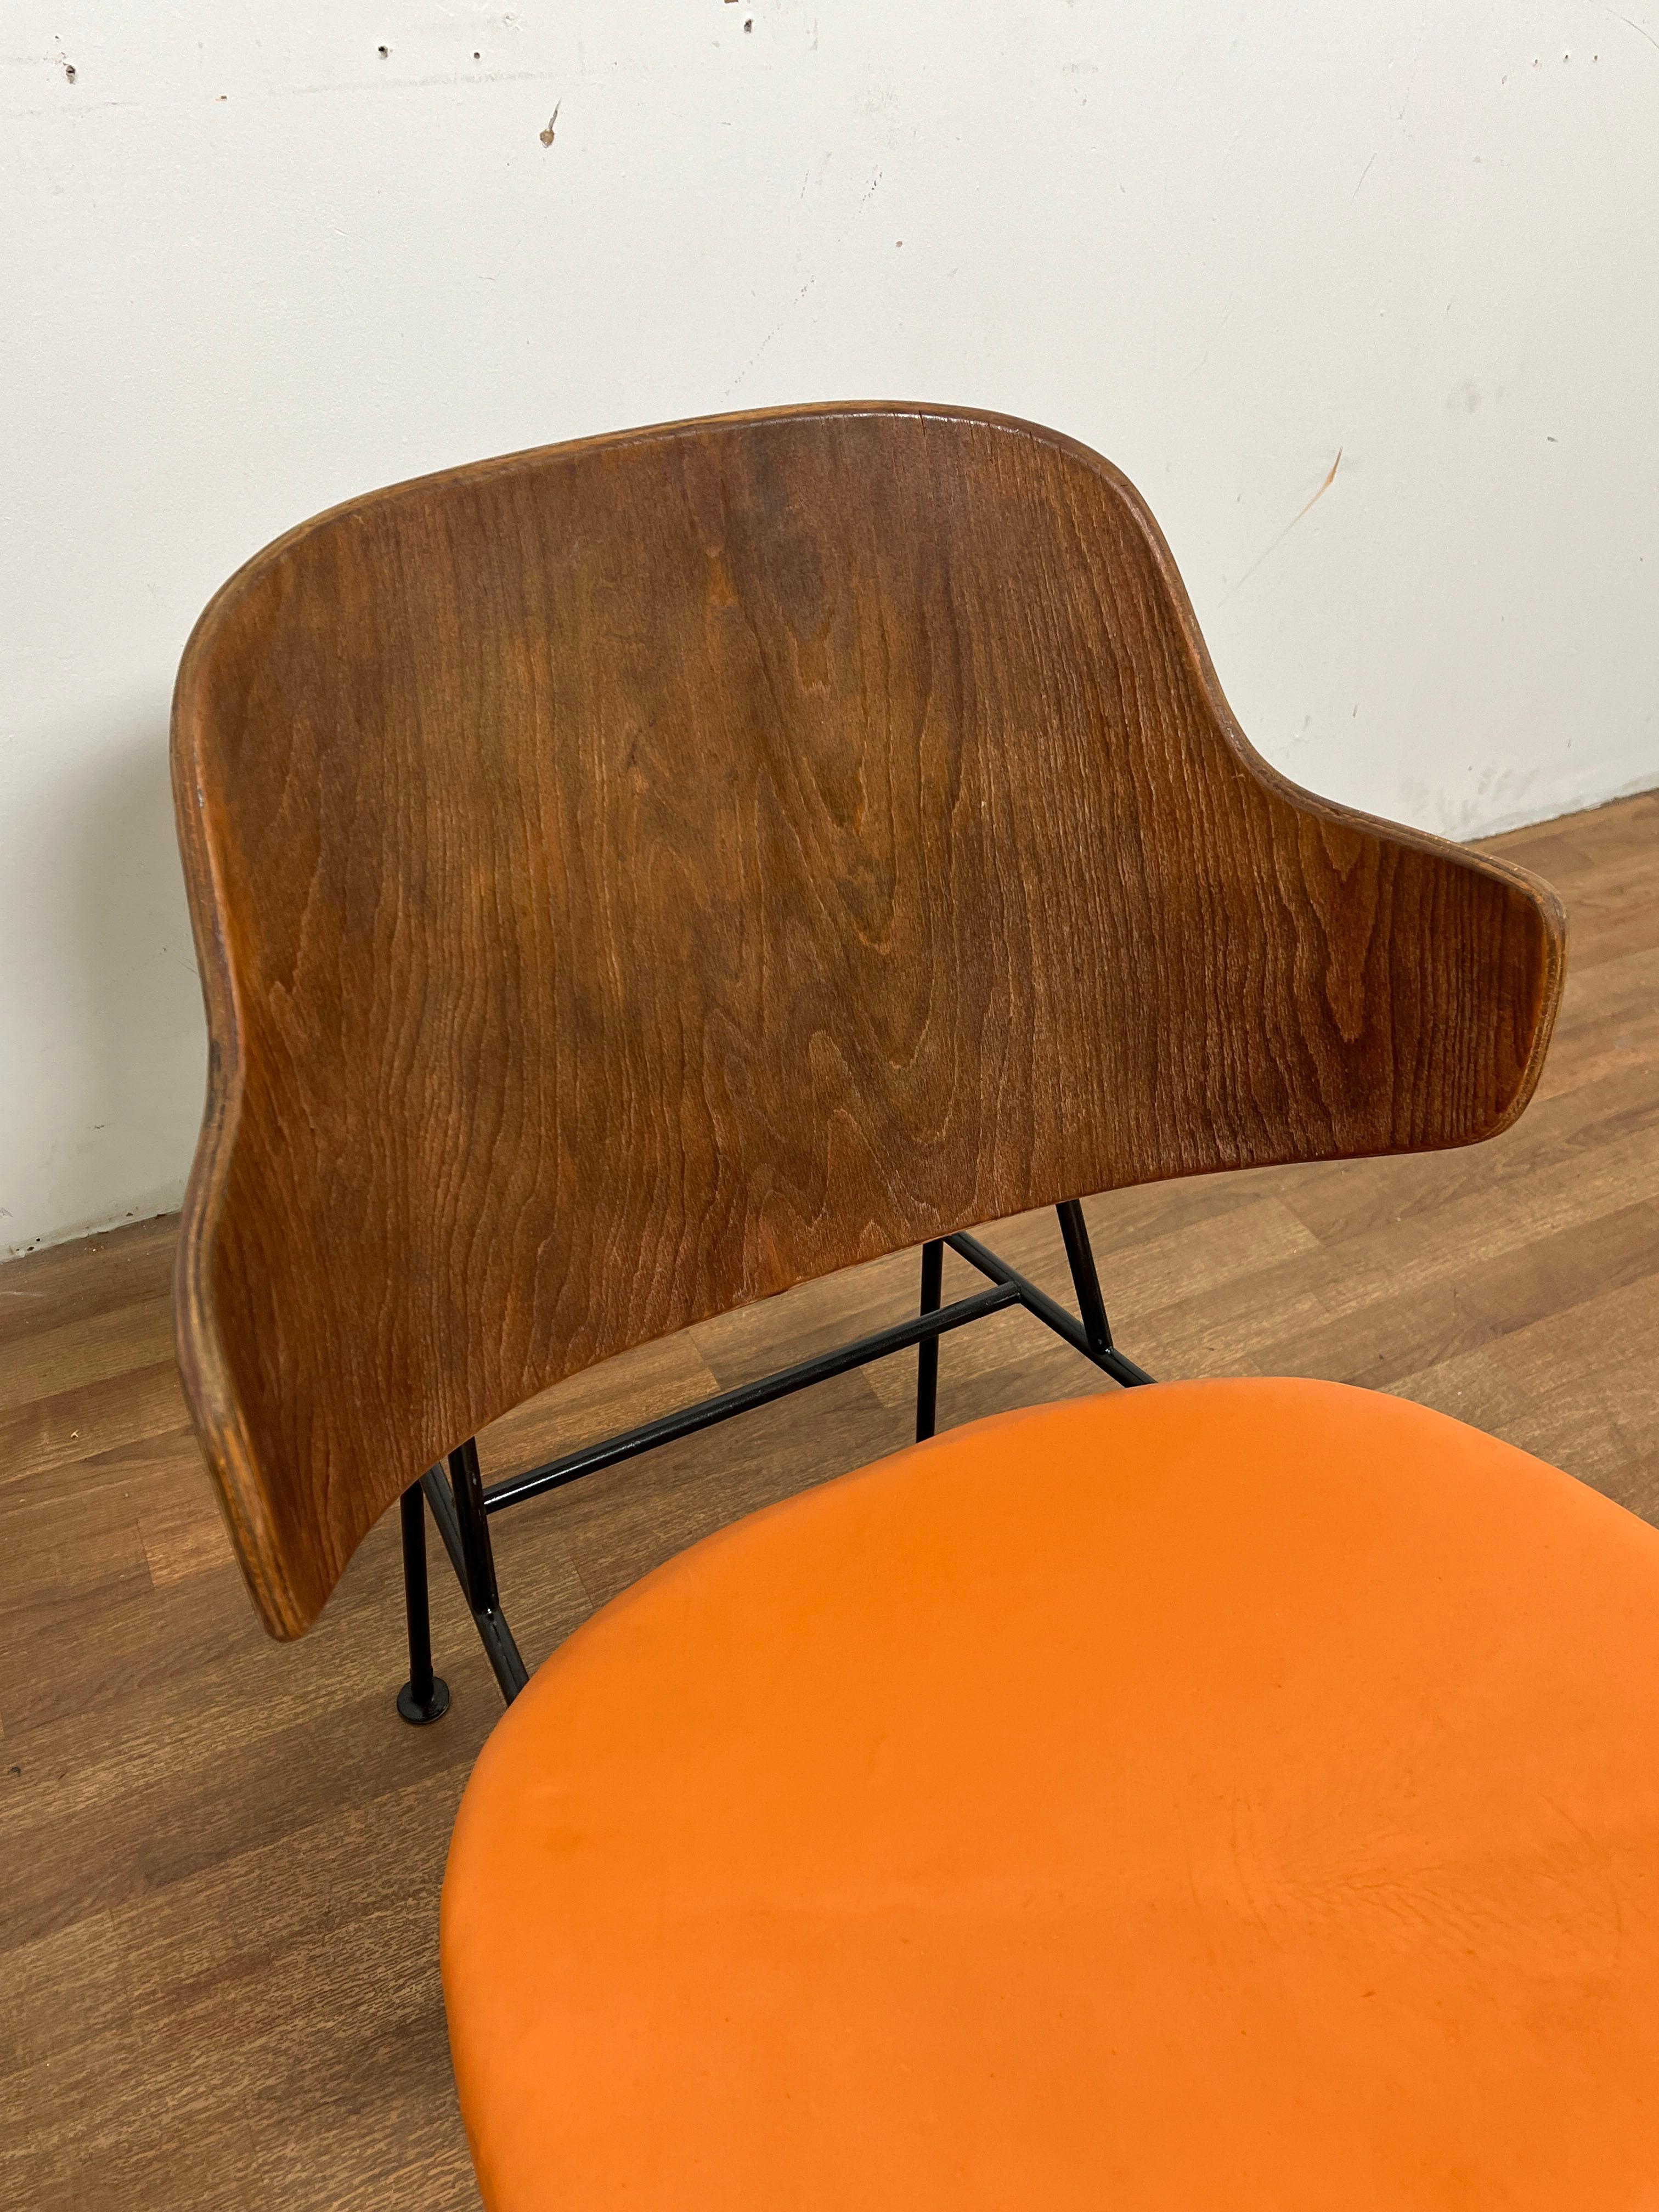 Ib Kofod-Larsen Danish Bentwood and Leather Penguin Chair Circa 1960s In Good Condition For Sale In Peabody, MA